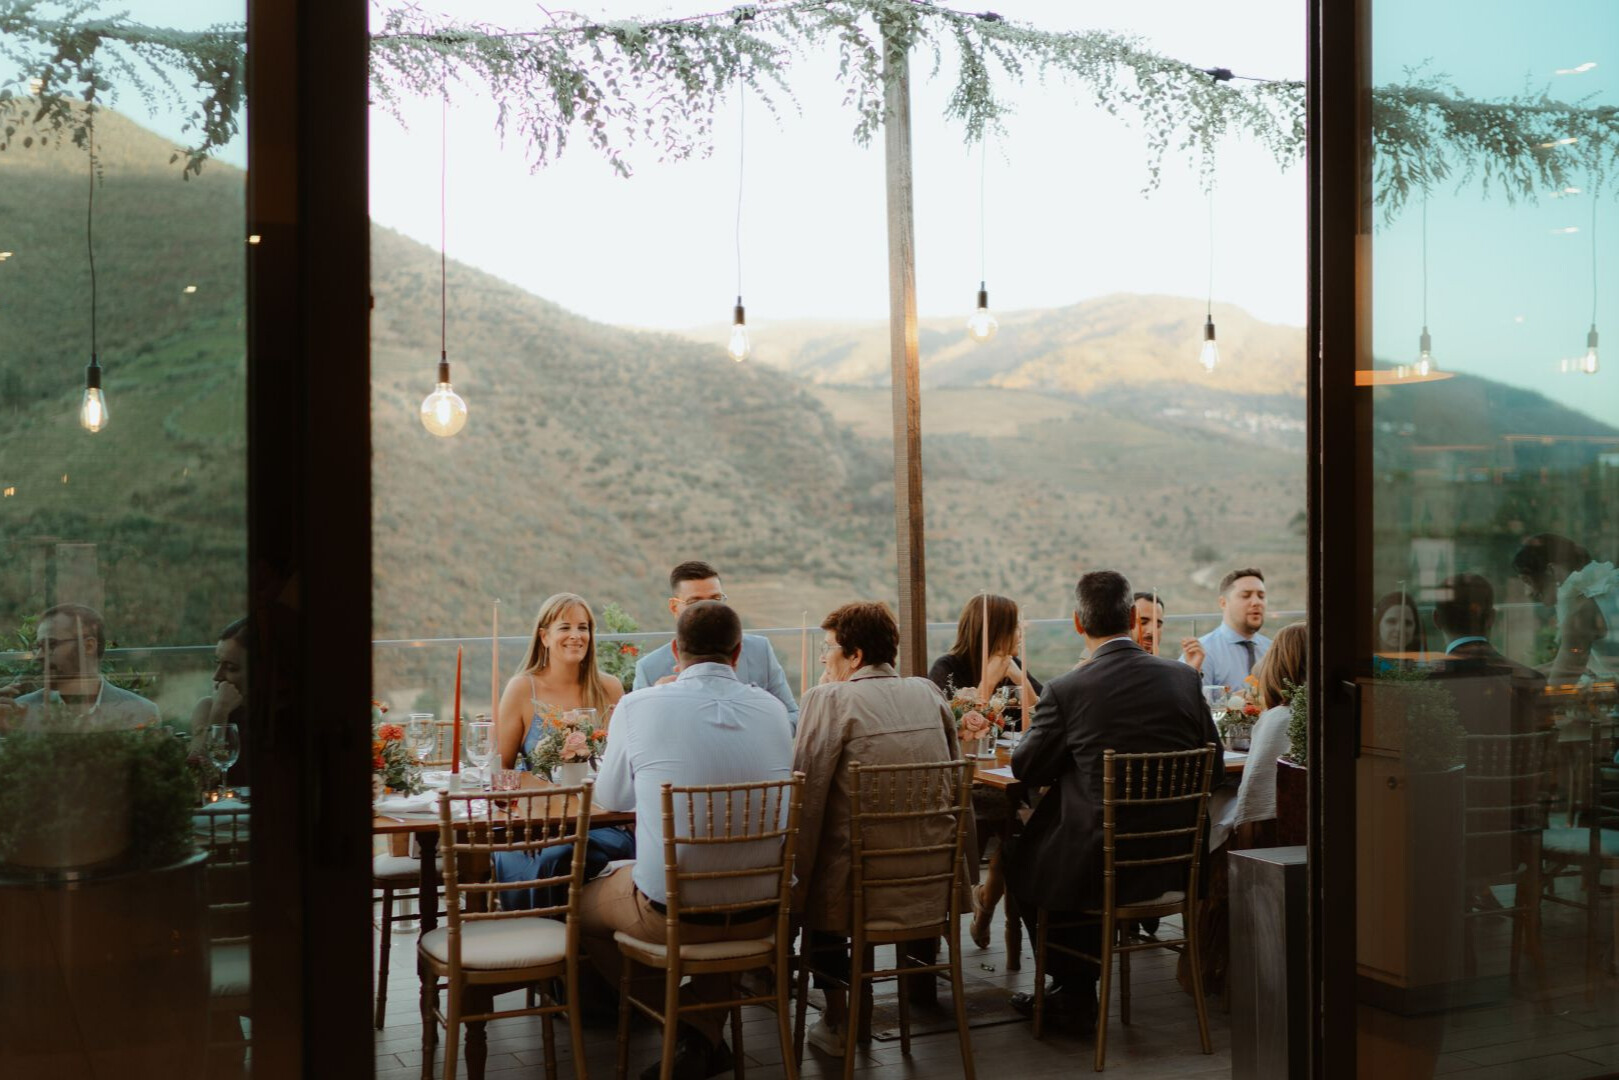 Unforgettable Vineyard Events in Douro with Romã Eventos